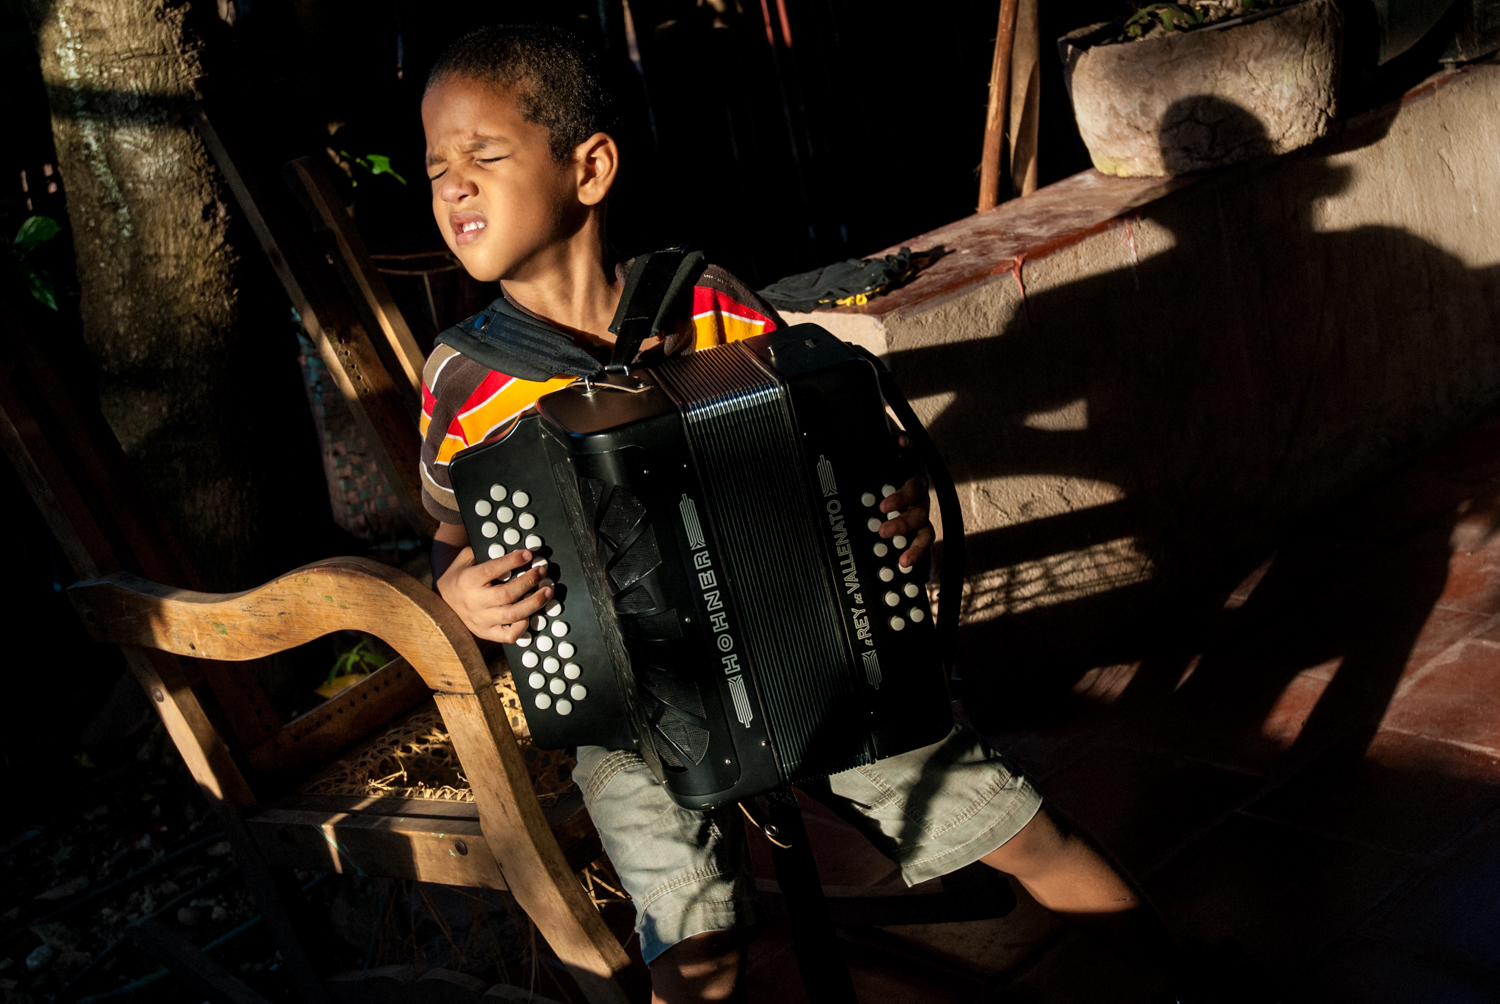 Mr. Dario Lopez's Vallenato music school in Villanueva. Youg boy practicing accordion.  Dario teaches mostly Acordion and holds his lessons in his home's patio. The accordion carries the melody in vallenato. Here the three row button model is used, known in different regions and at various times as “el moruno,” “guacamayo” and “espejito” (“machine screw”). The accordion first came to Colombia in the latter 1800s where it was used in European dance music. From the very beginning it was considered a lowbrow instrument, a position it proudly maintains to this day. Most accordions continue to be imported from Honer in Germany where they are tweaked to produce the warm and reedy sound Colombians prefer.